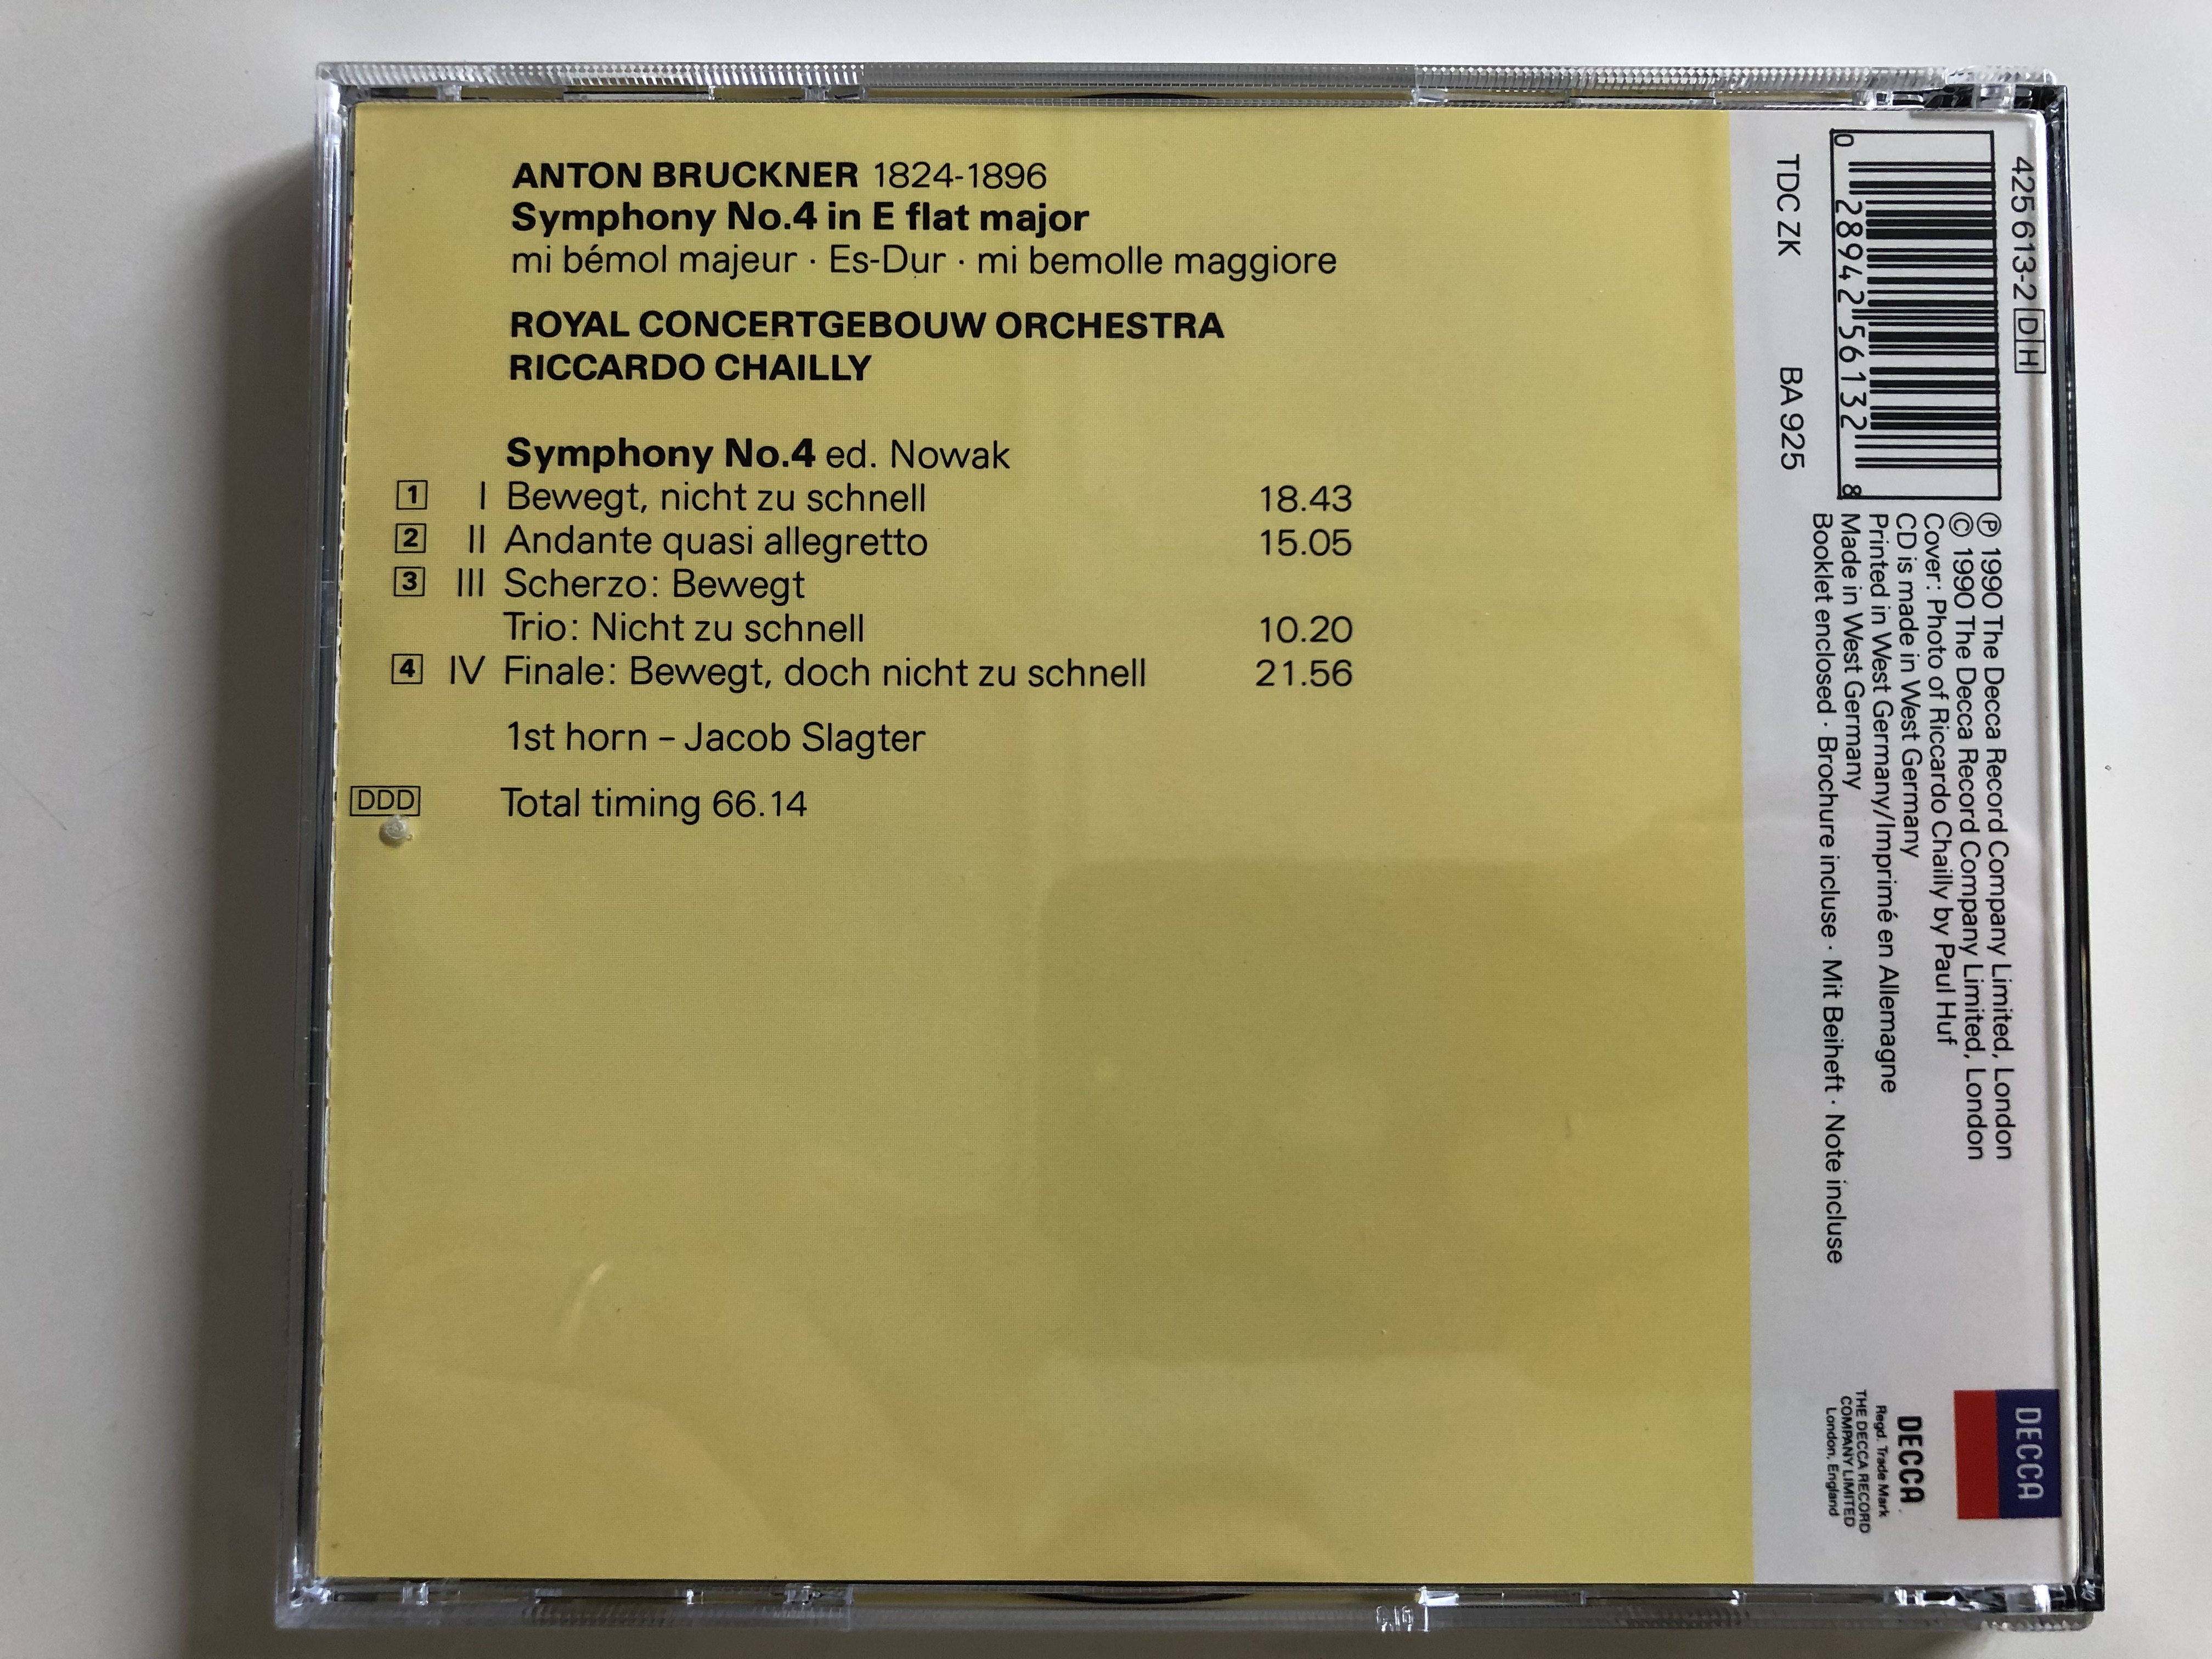 bruckner-symphony-no.-4-royal-concertgebouw-orchestra-conducted-by-riccardo-chailly-decca-audio-cd-1990-425-613-2-6-.jpg